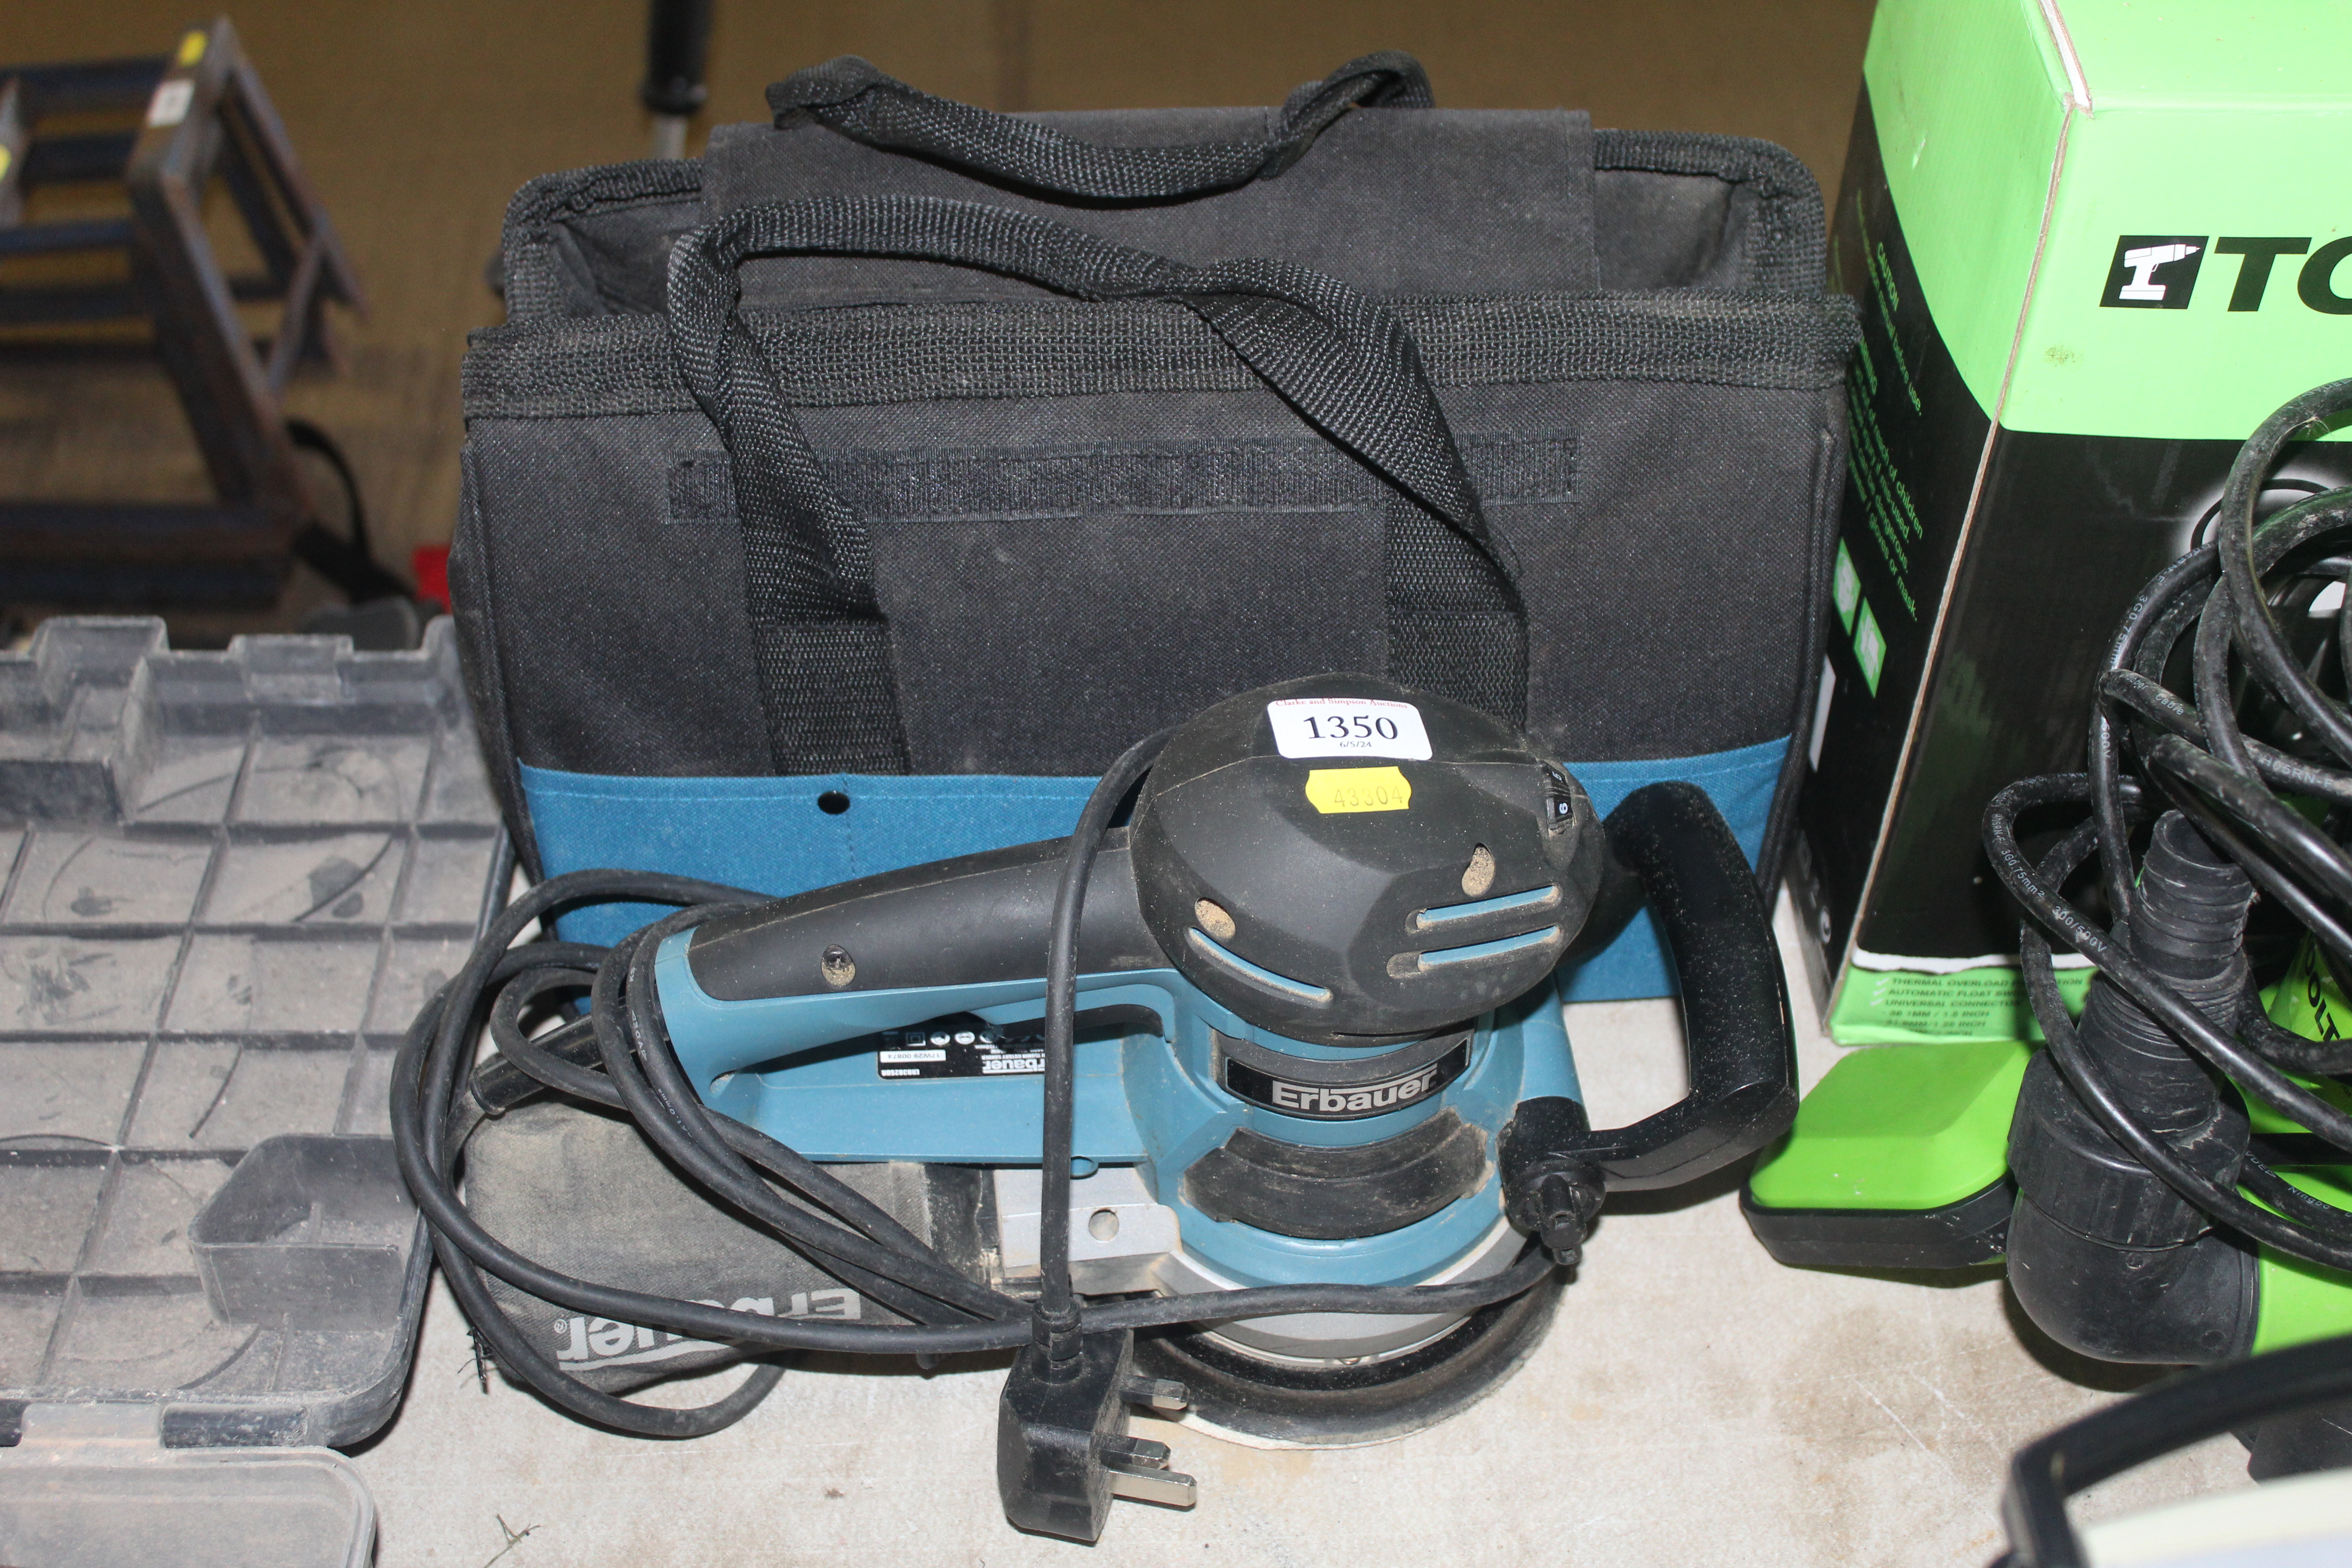 An Erbauer ERB382SDR 240v rotary disc sander with carry holdall and instruction guide